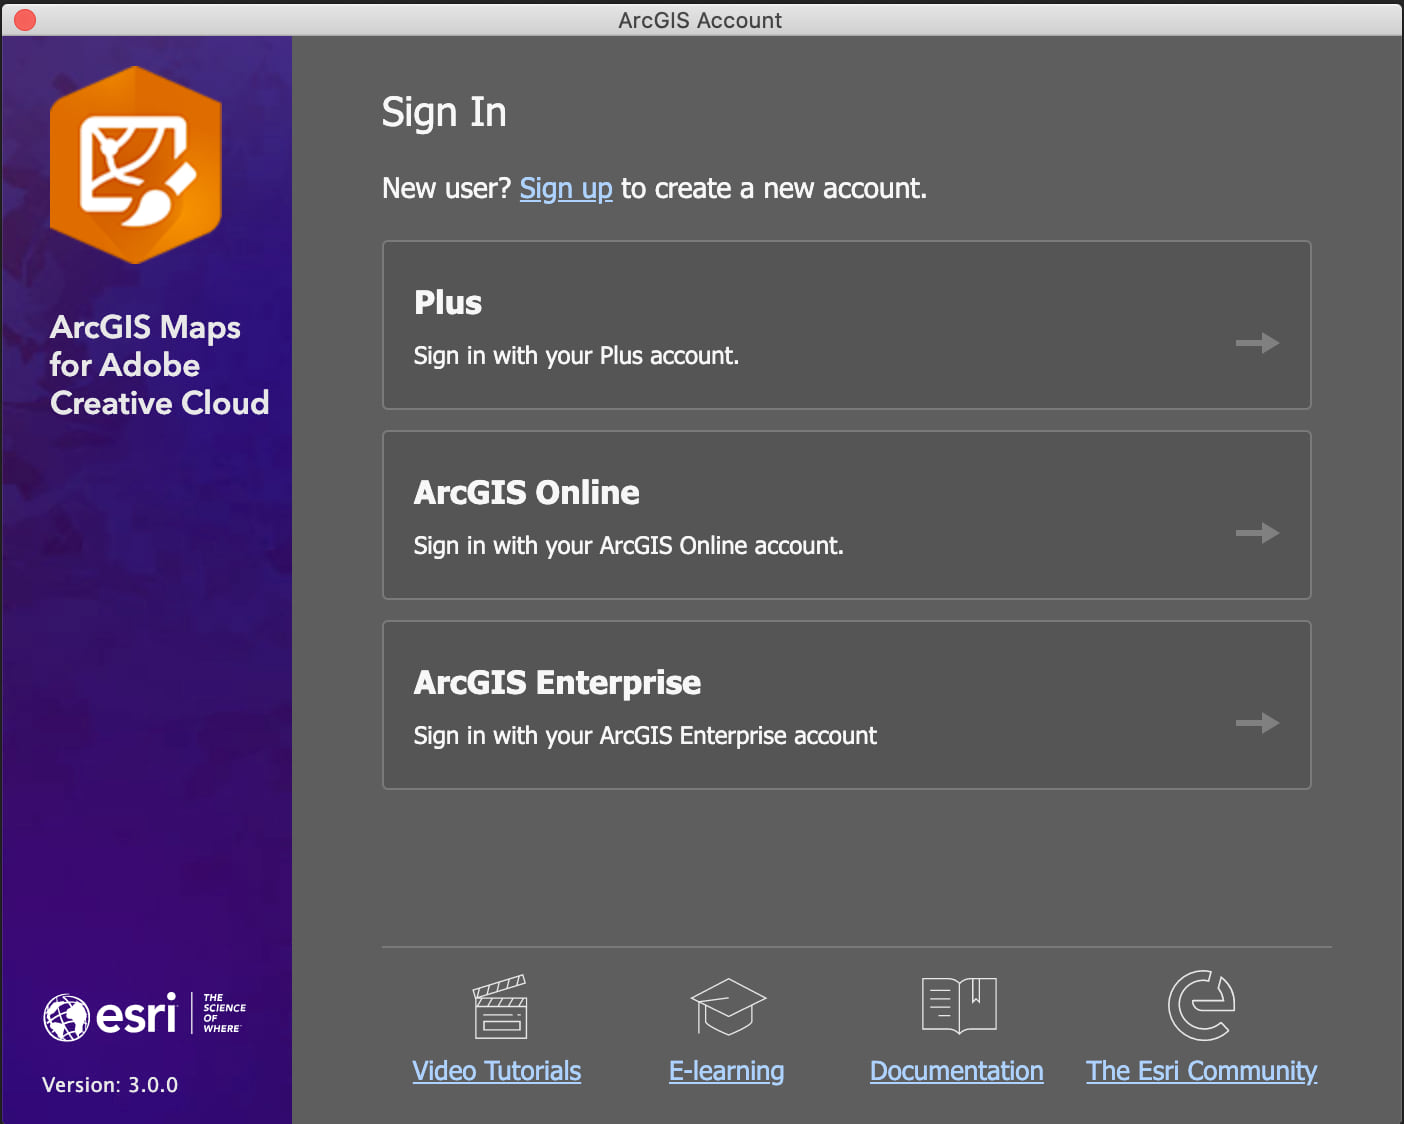 Sign in with an ArcGIS Enterprise account